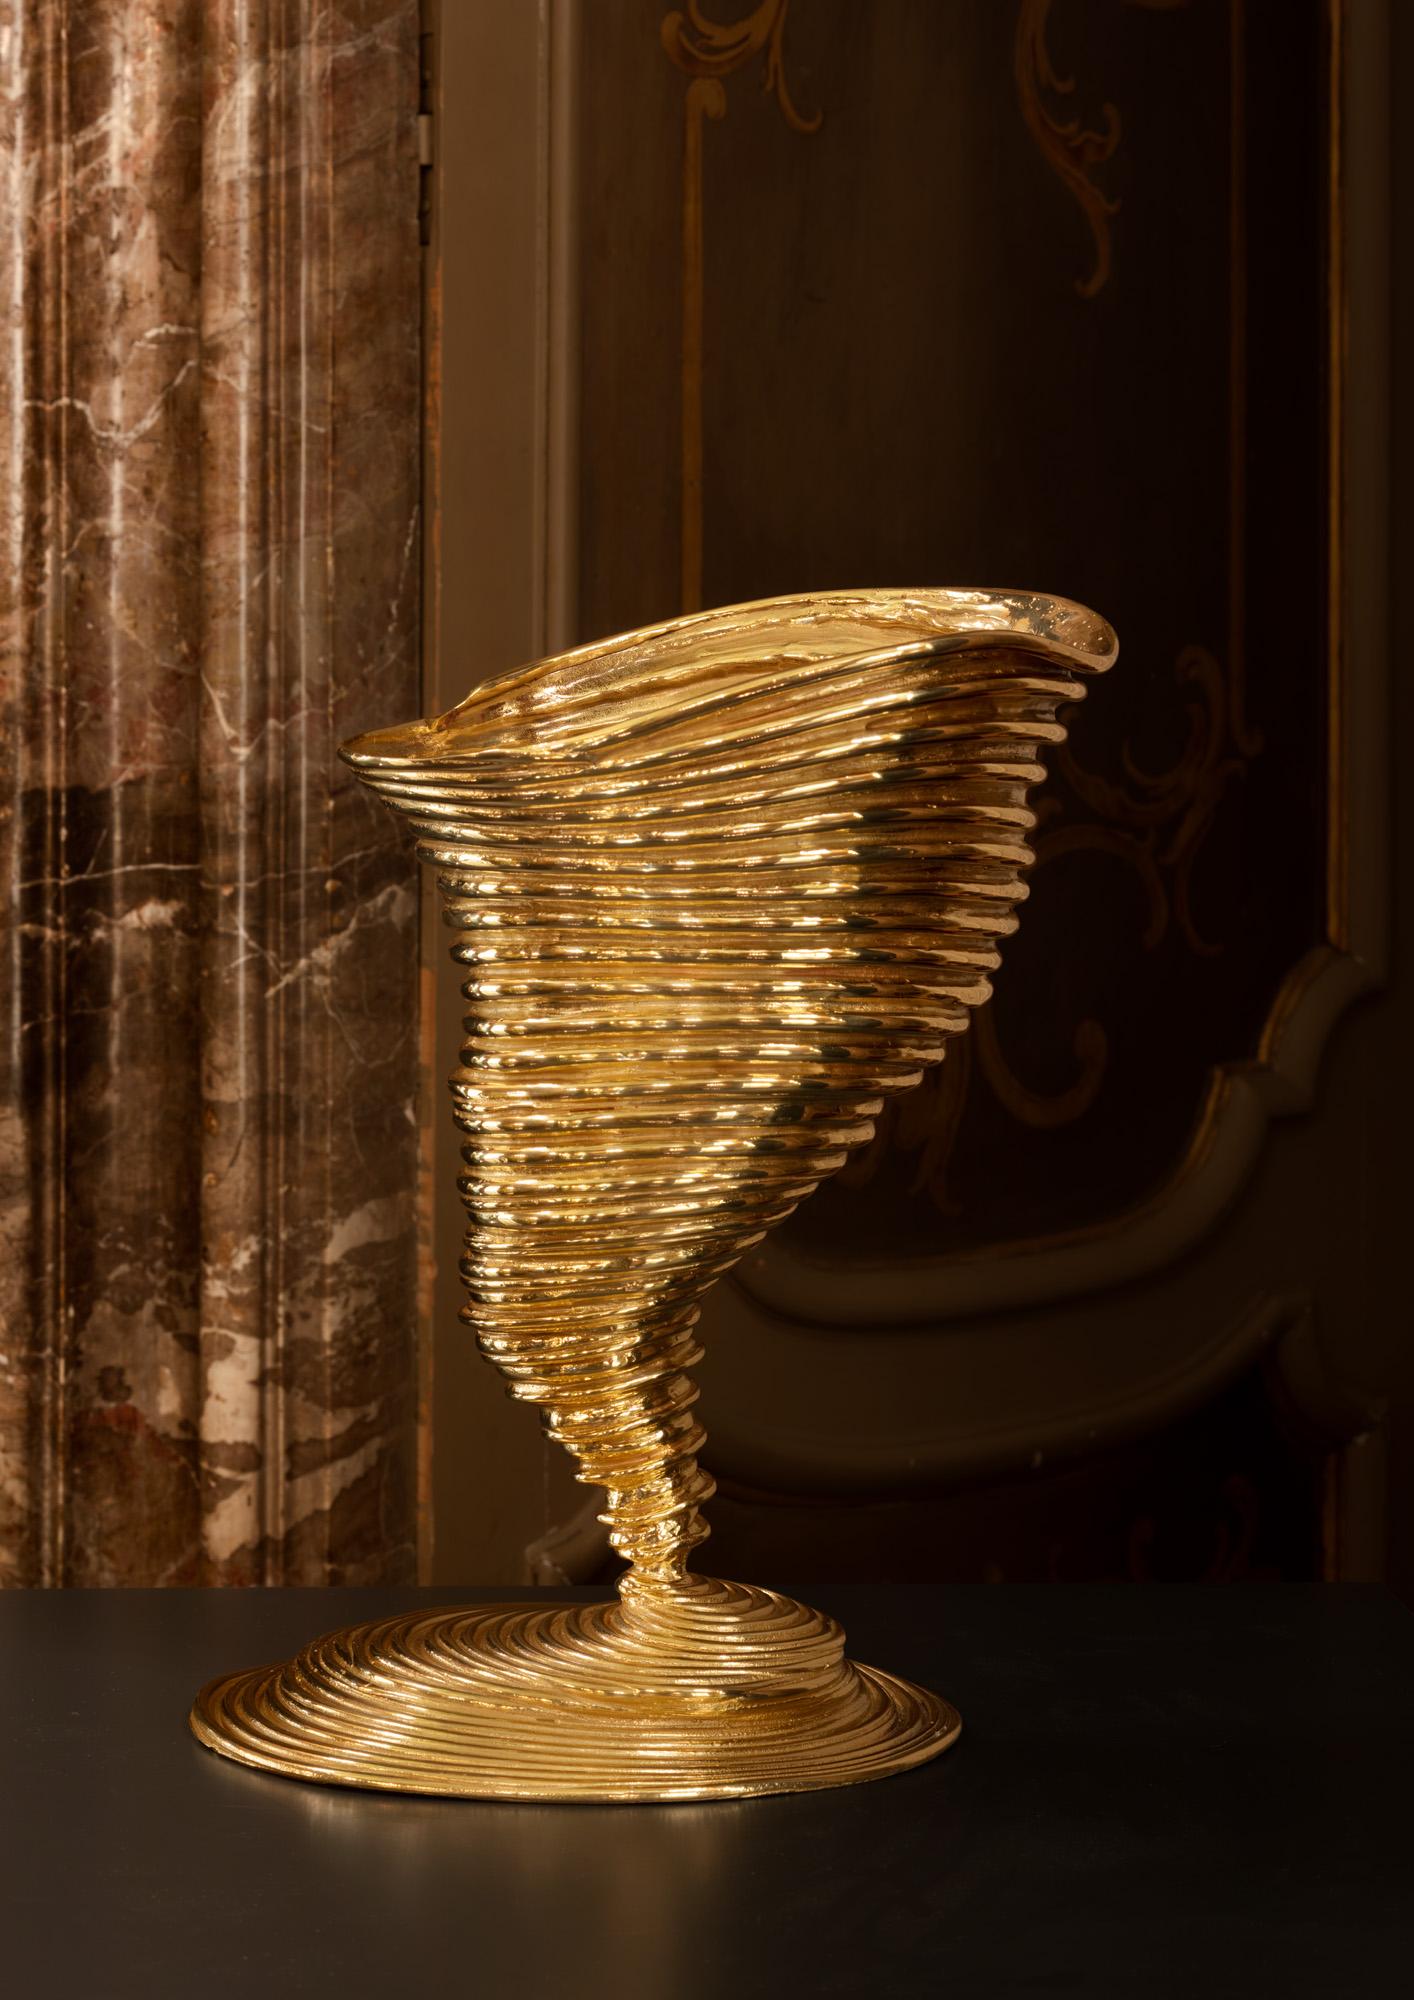 Ghidini 1961 Tornado Sculptural Vase in Bronze by Campana Brothers In New Condition For Sale In Villa Carcina, IT